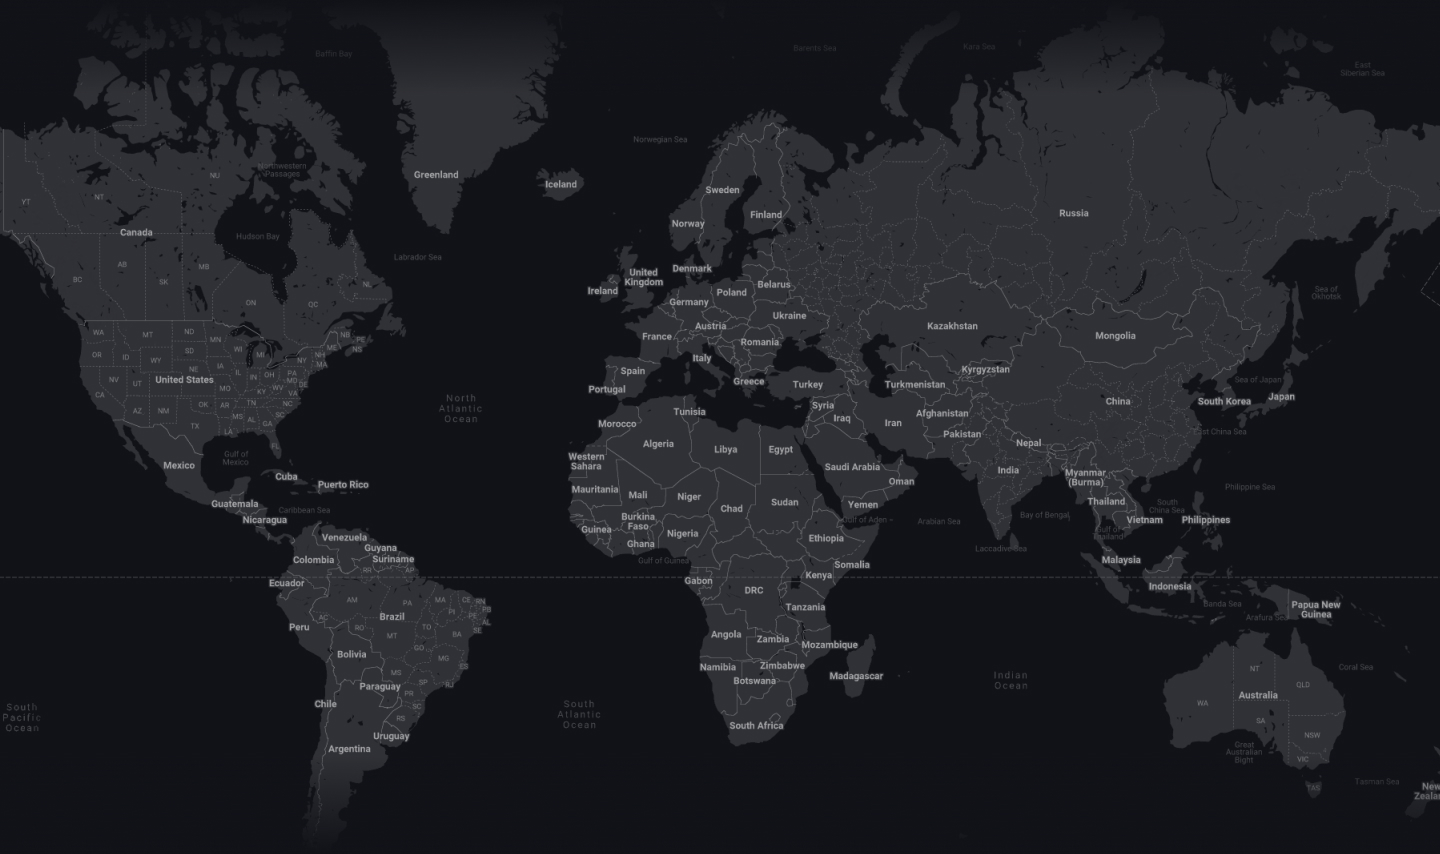 World map of locations and hubs